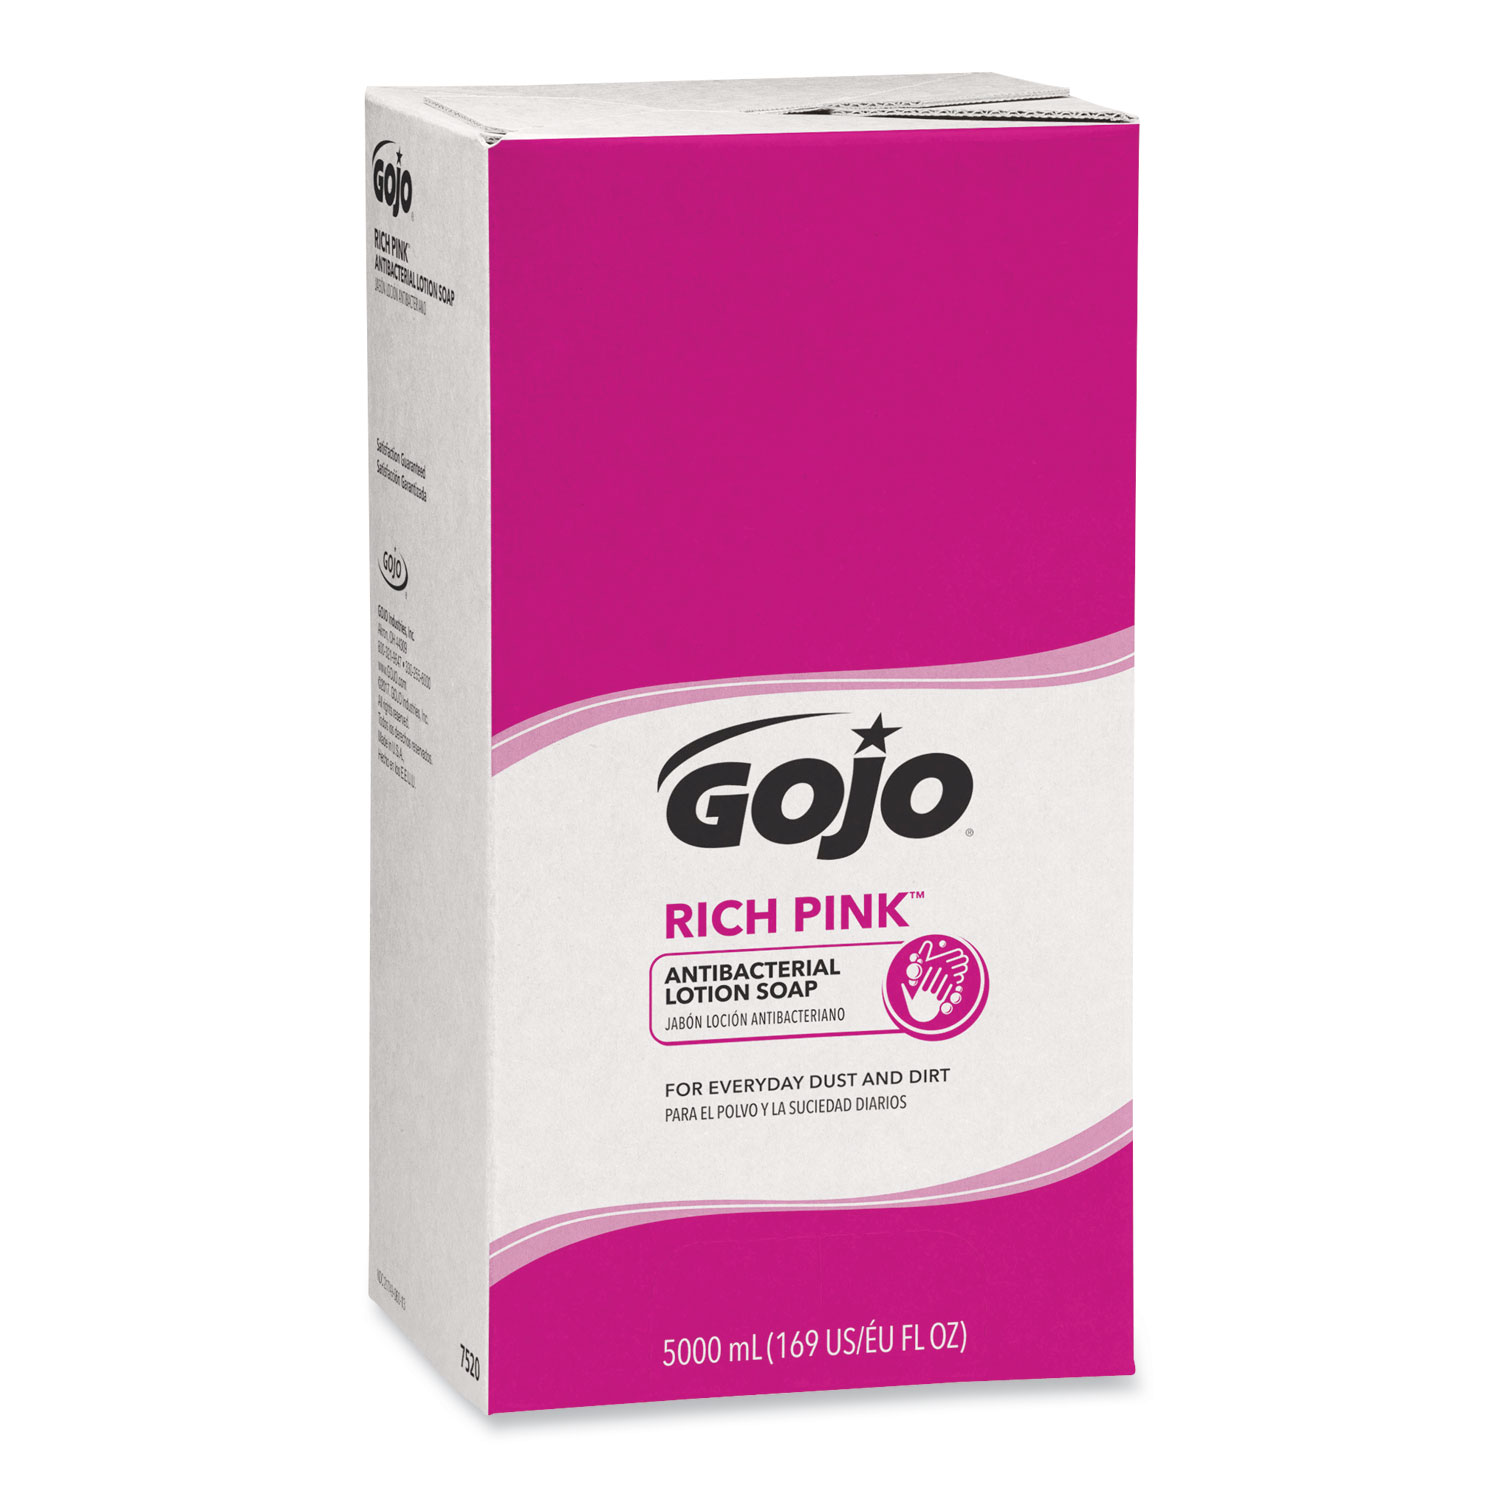  GOJO 7520-02 RICH PINK Antibacterial Lotion Soap Refill, 5000mL, Floral Scent, Pink, 2/Carton (GOJ7520) 